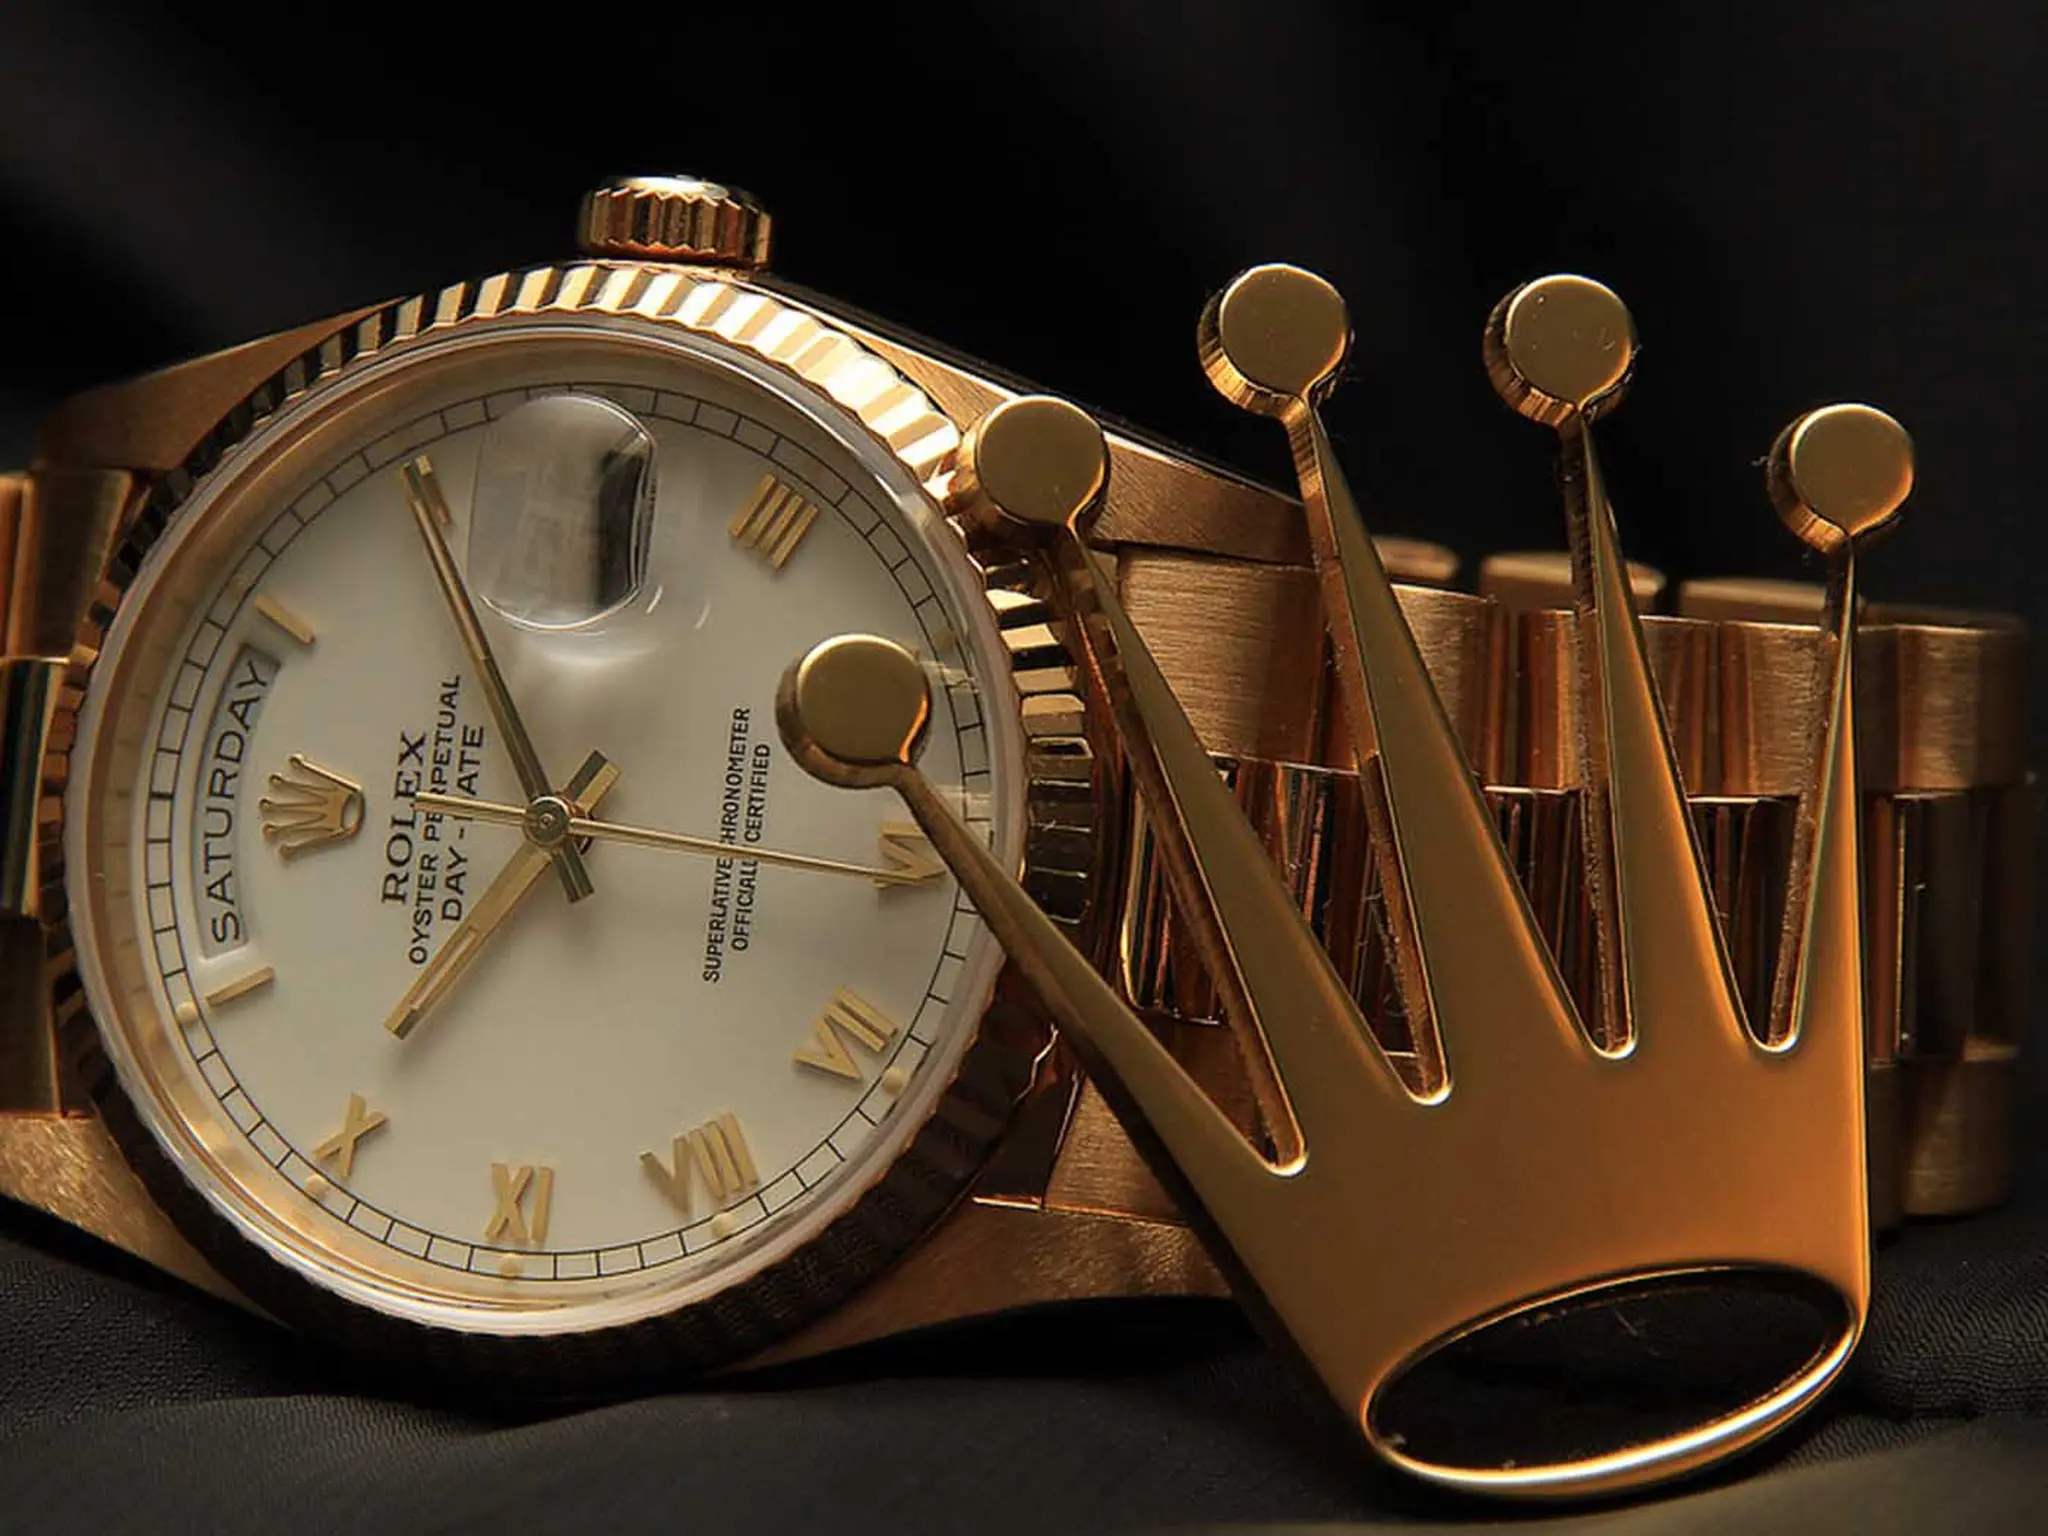 A Resident in the UAE was expelled and fined 201,000 dirhams for stealing a Rolex watch